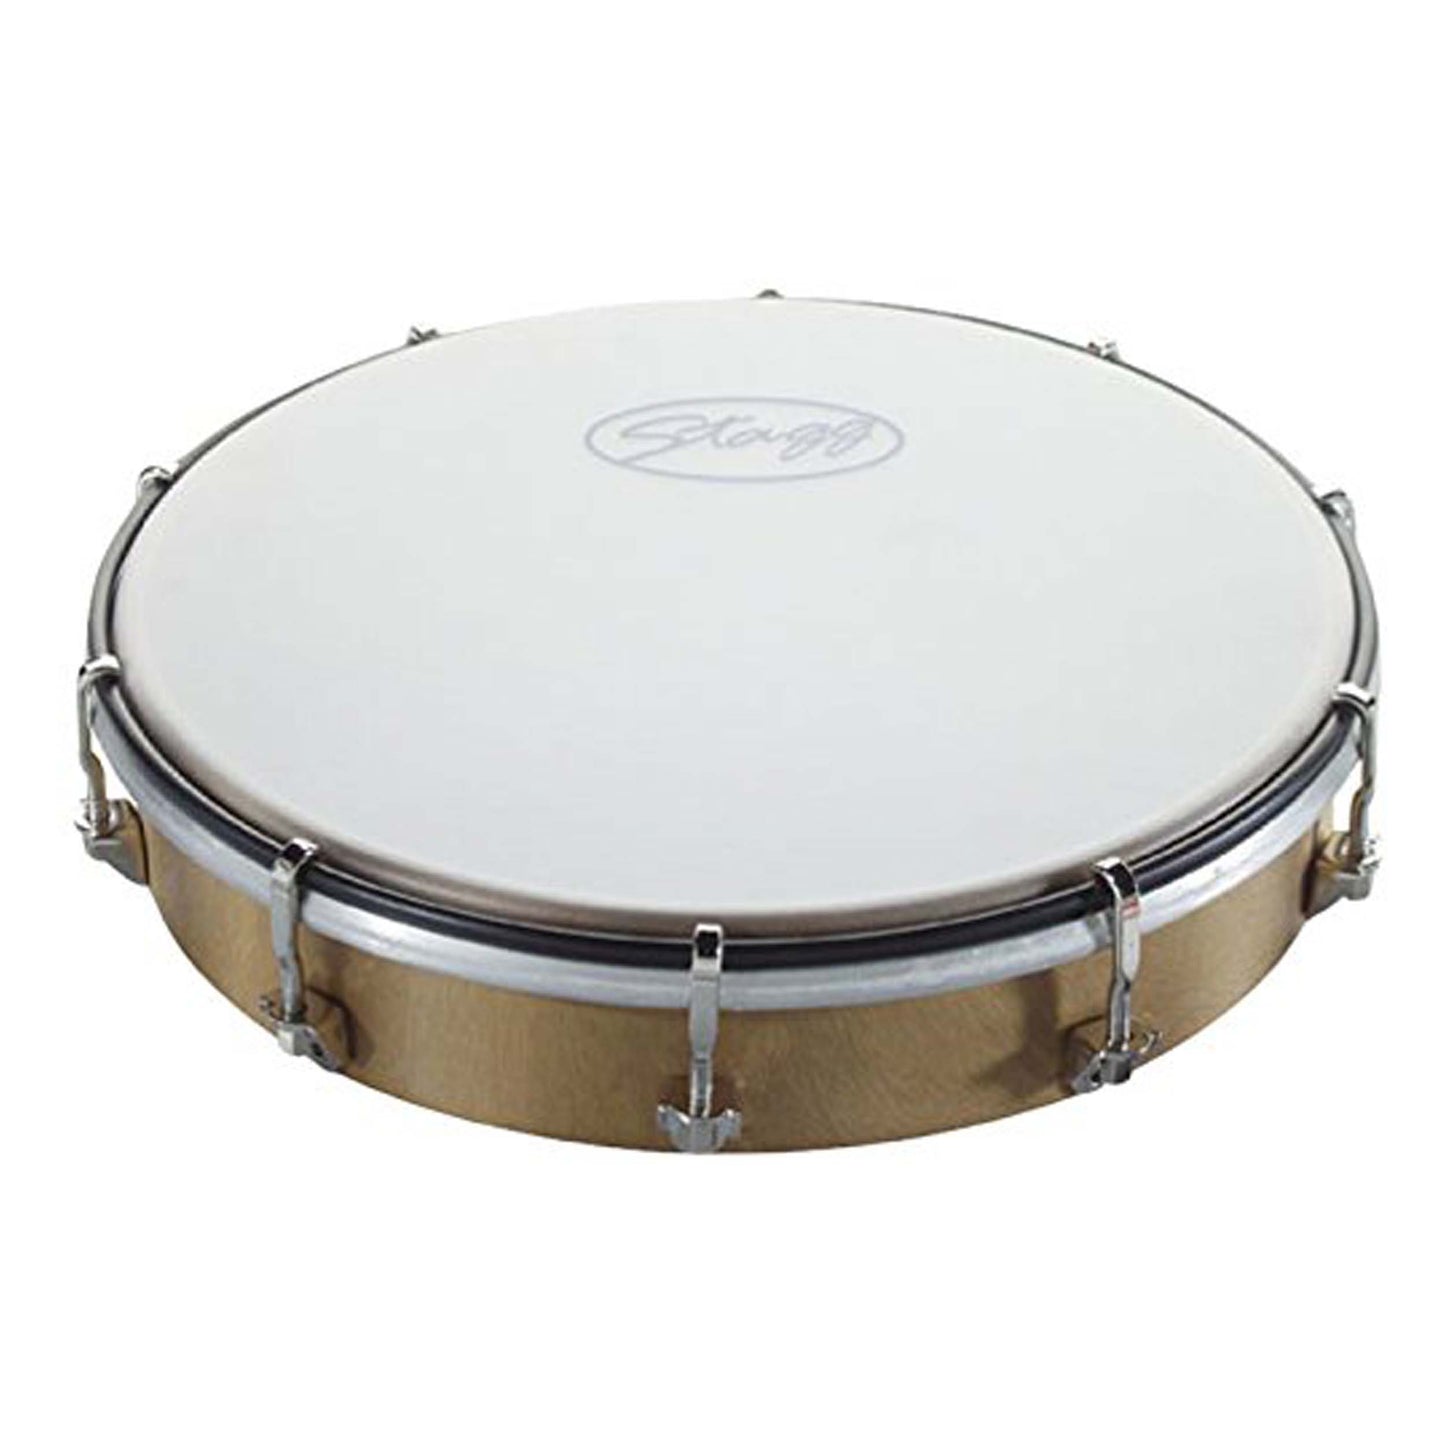 Stagg HAD-010W Tunable Hand Drum